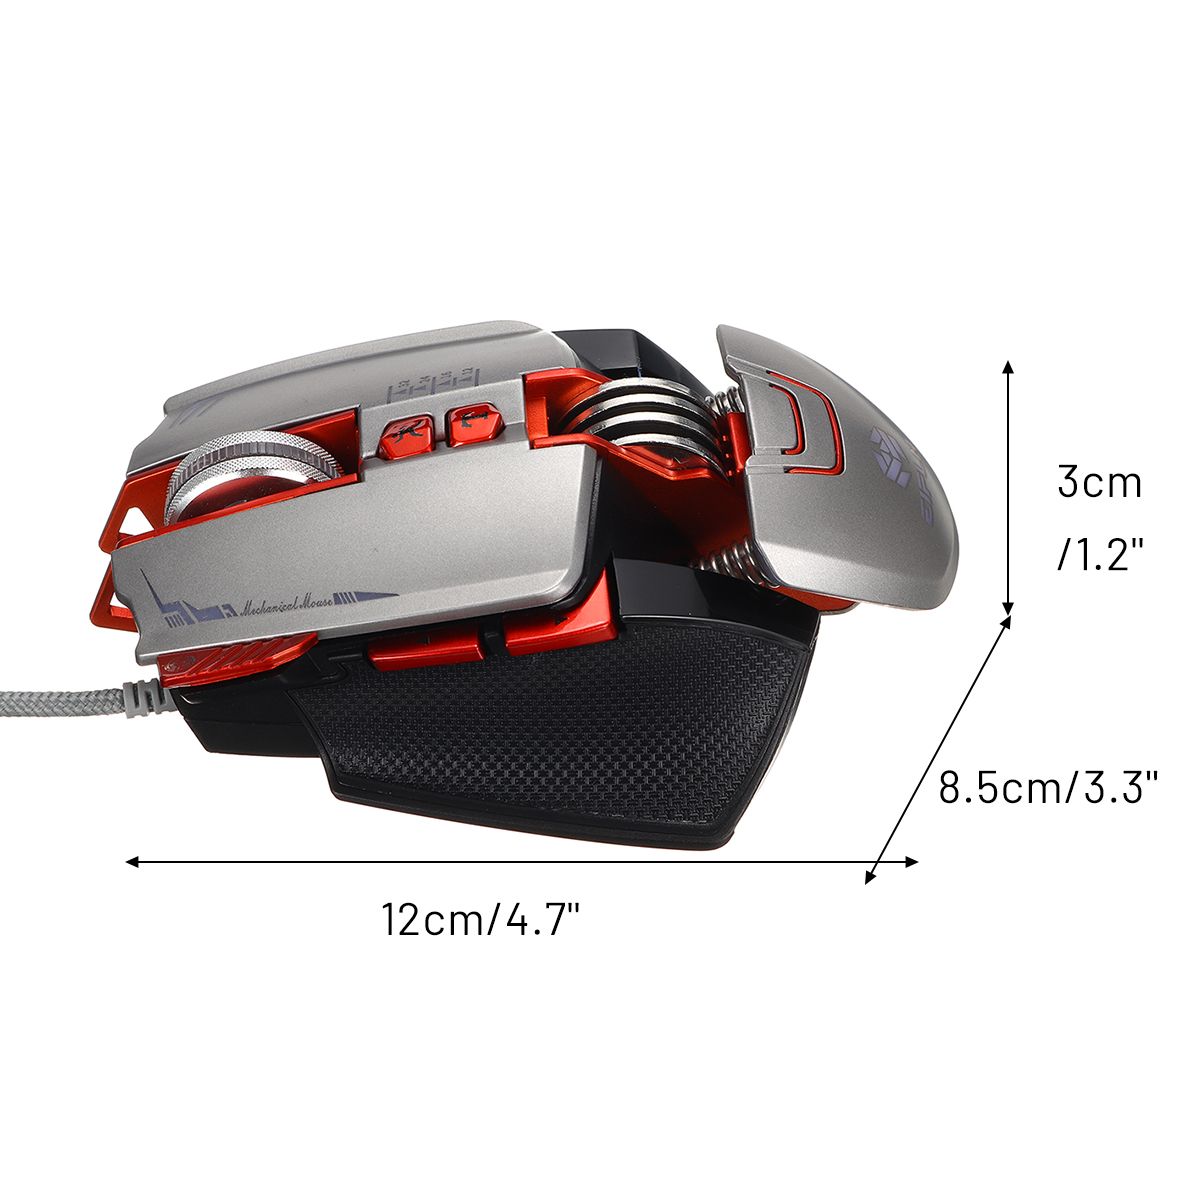 E72-Wired-Mechanical-Mouse-8D-Lighting-Macro-Programming-Electronic-Gaming-Mouse-with-RGB-Rainbow-Ba-1741324